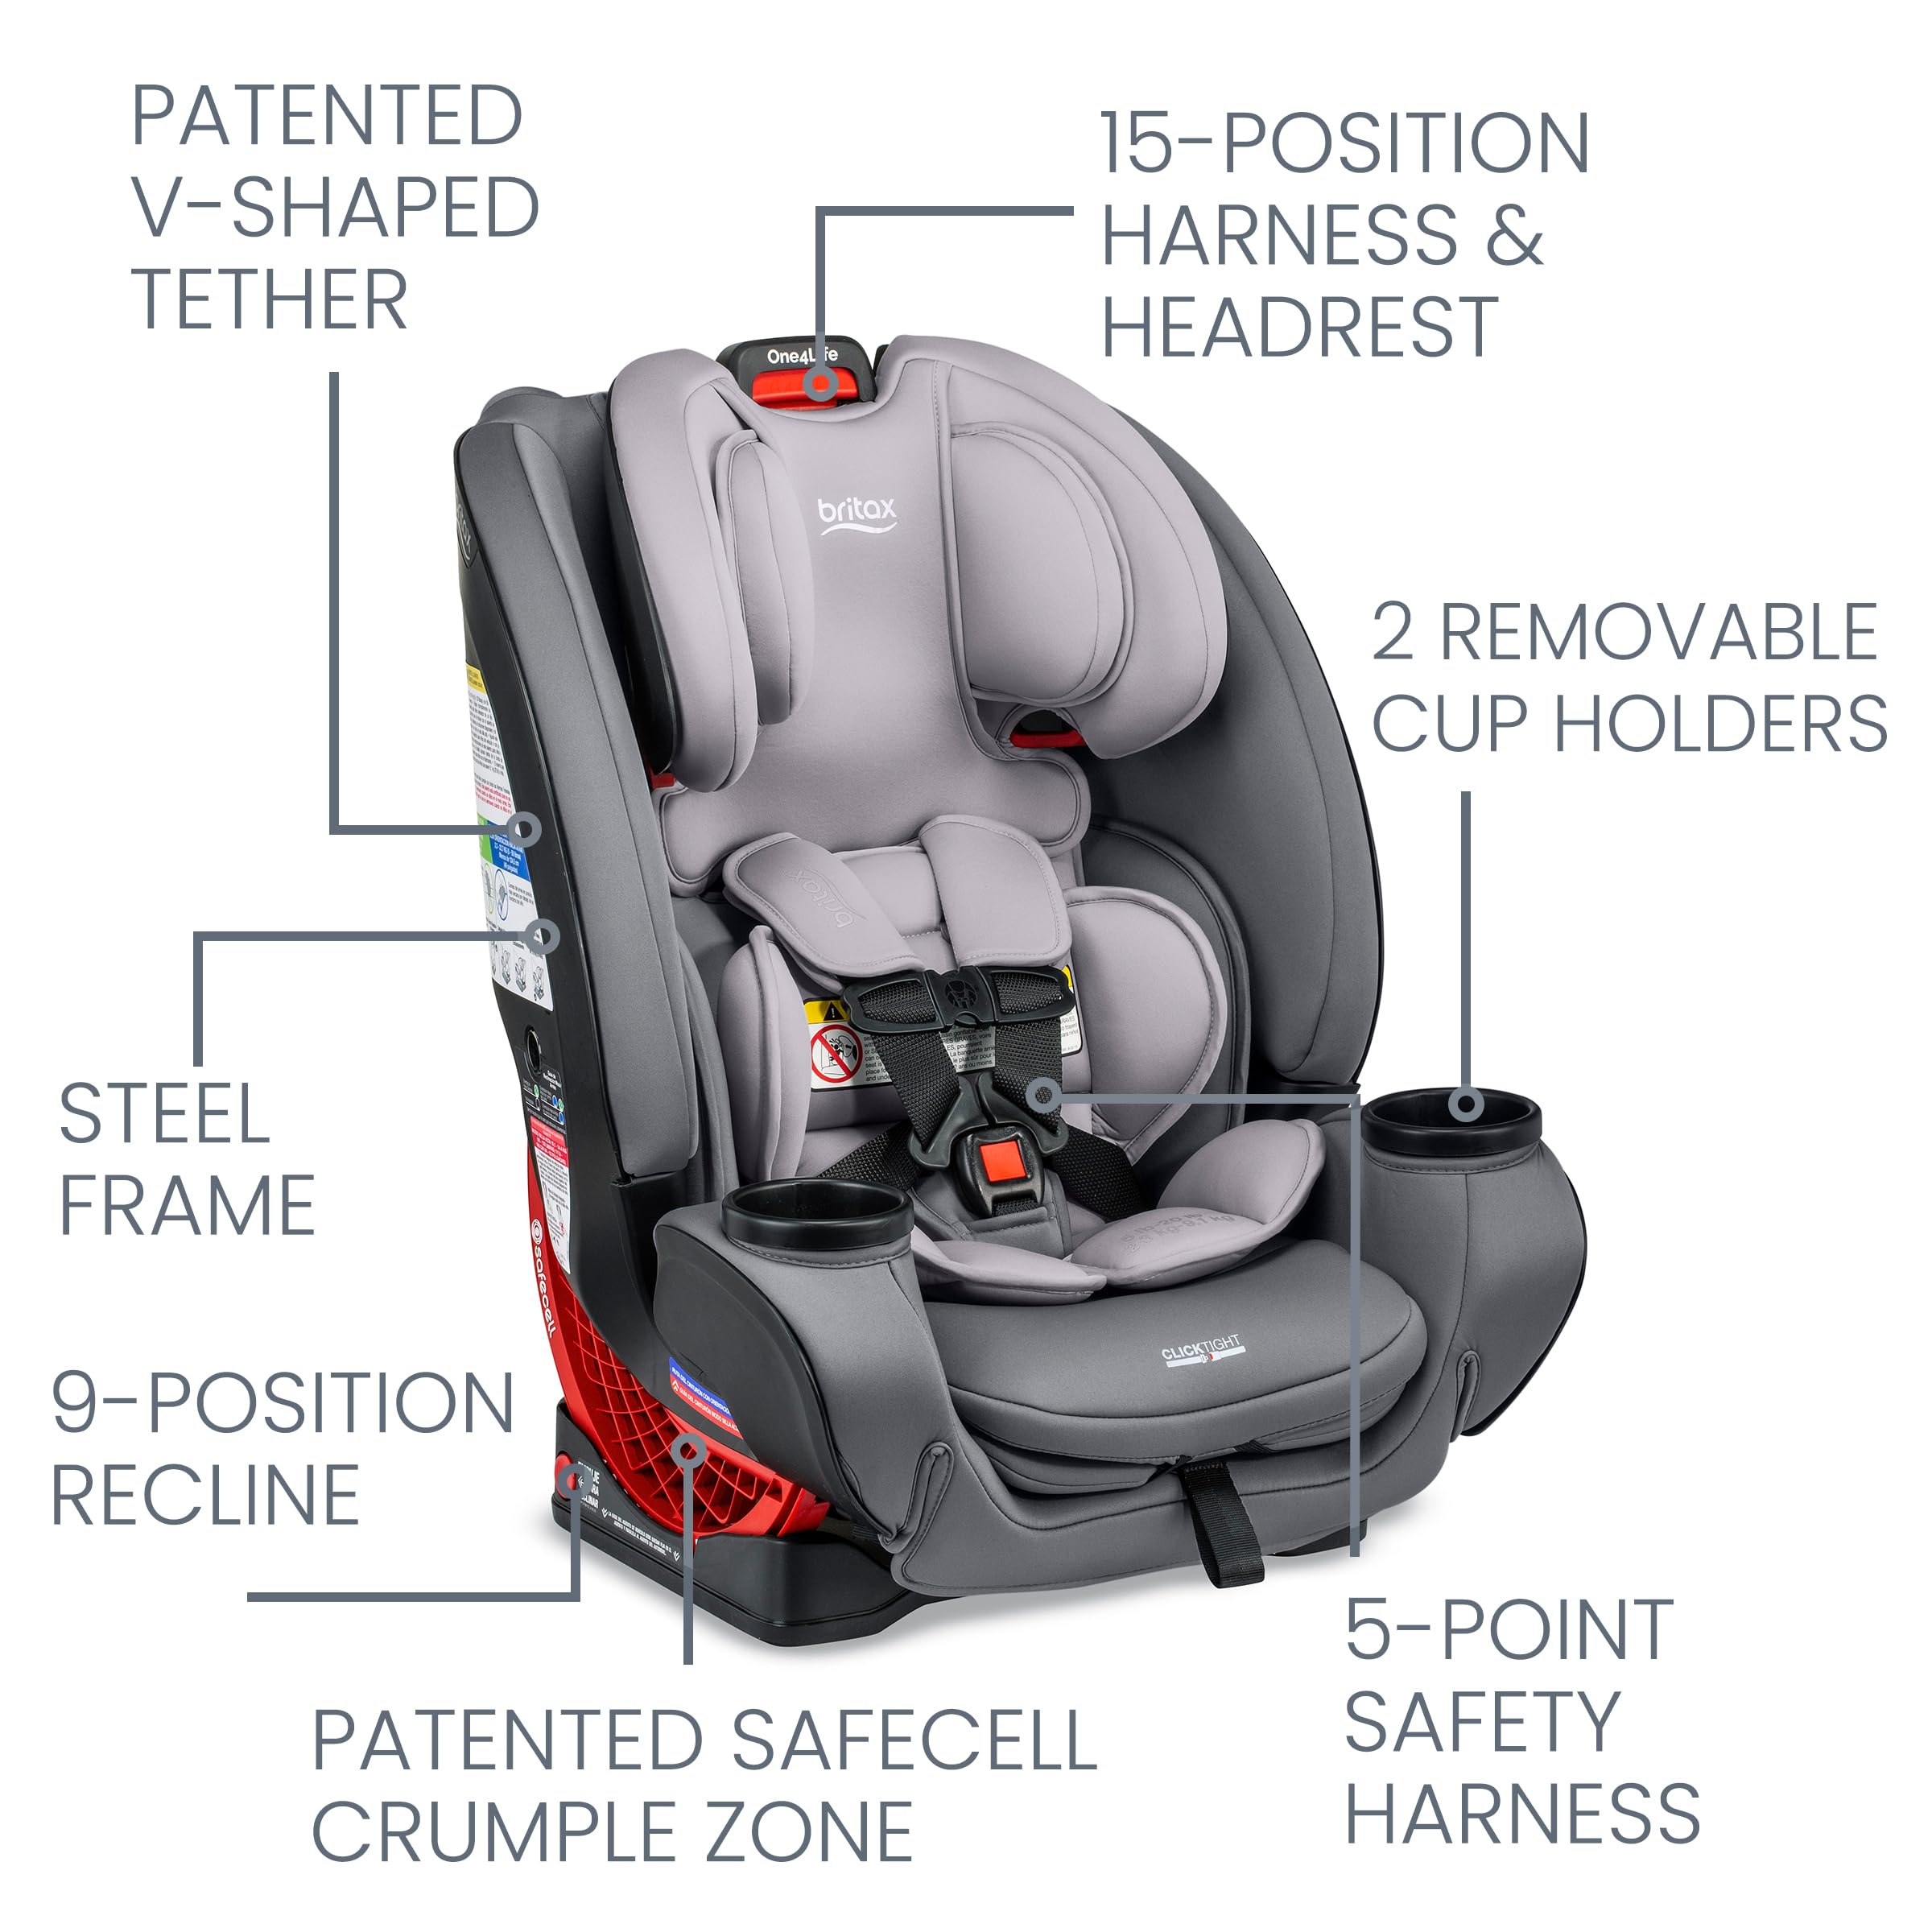 Britax One4Life Convertible Car Seat, 10 Years of Use from 5 to 120 Pounds, Converts from Rear-Facing Infant Car Seat to Forward-Facing Booster Seat, Machine-Washable Fabric, Glacier Graphite